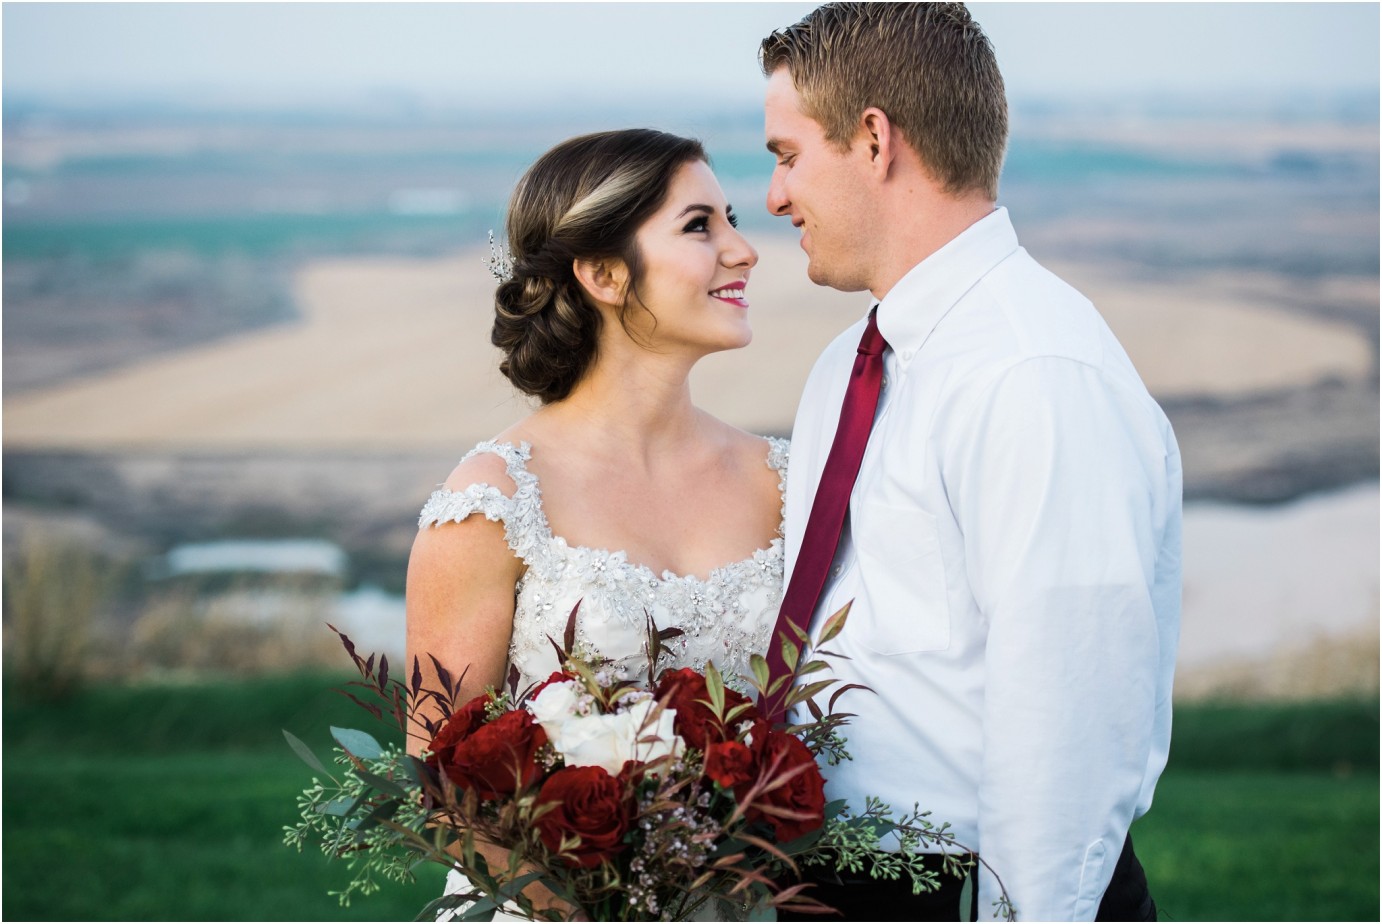 Eagle Lakes Lodge Wedding Inspiration Shoot bride and groom with bouquet photo